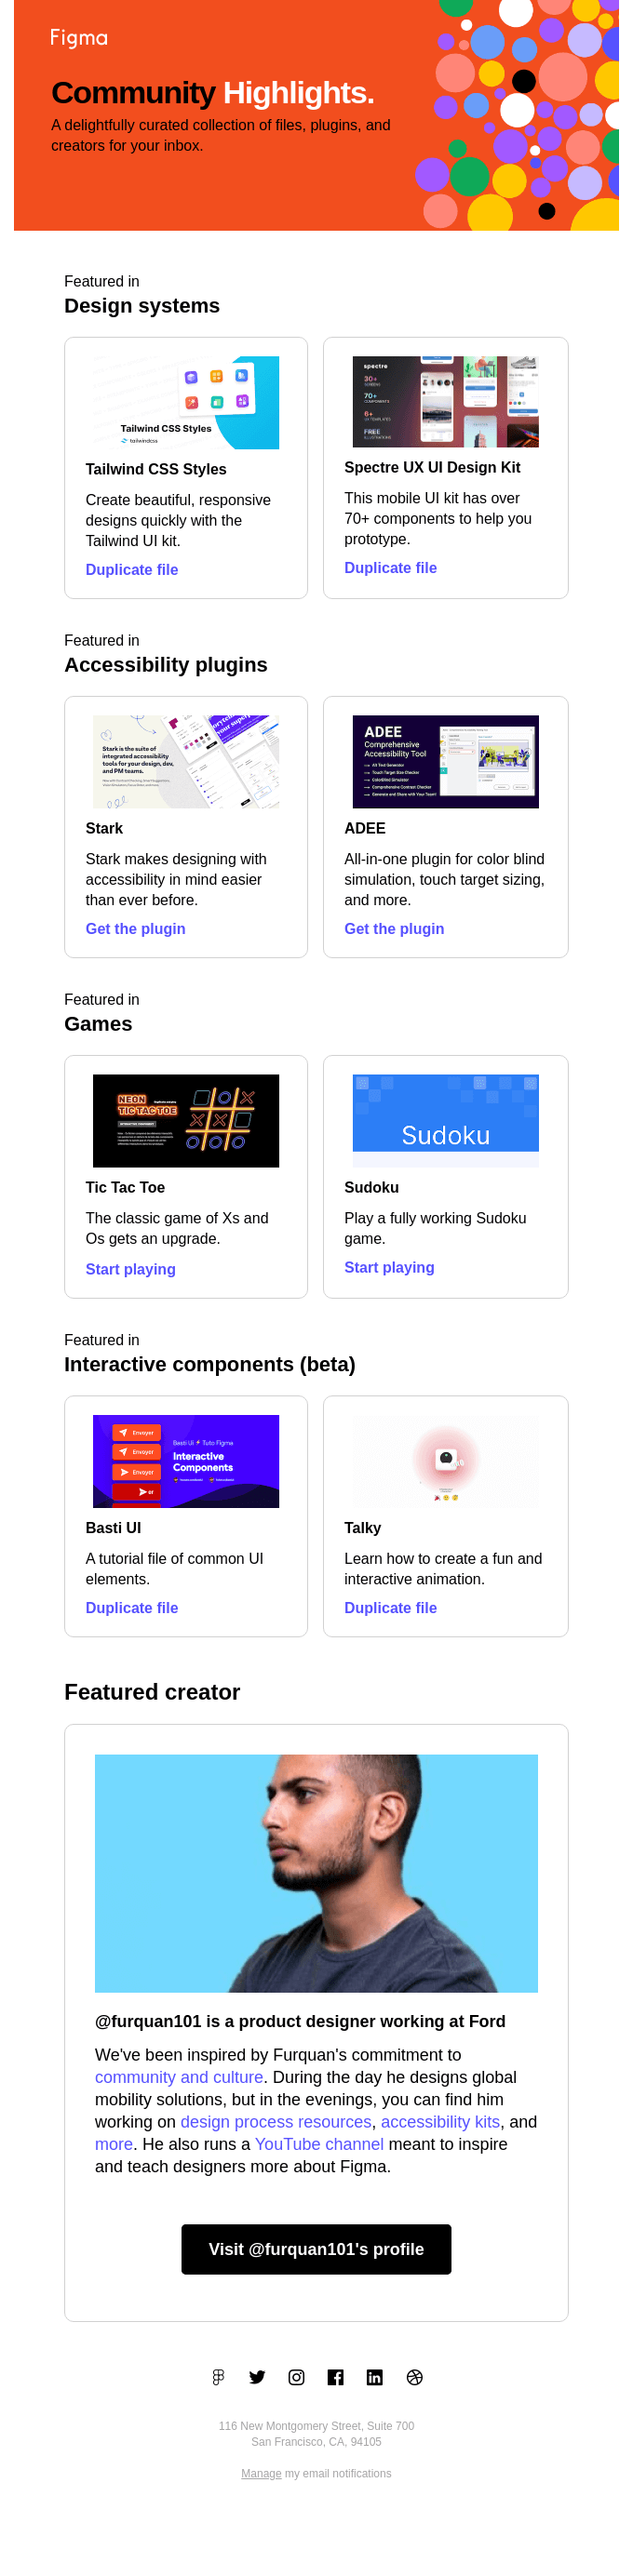 Freshly picked from Figma 🍎: Accessibility plugins, games, and more - Figma Email Newsletter